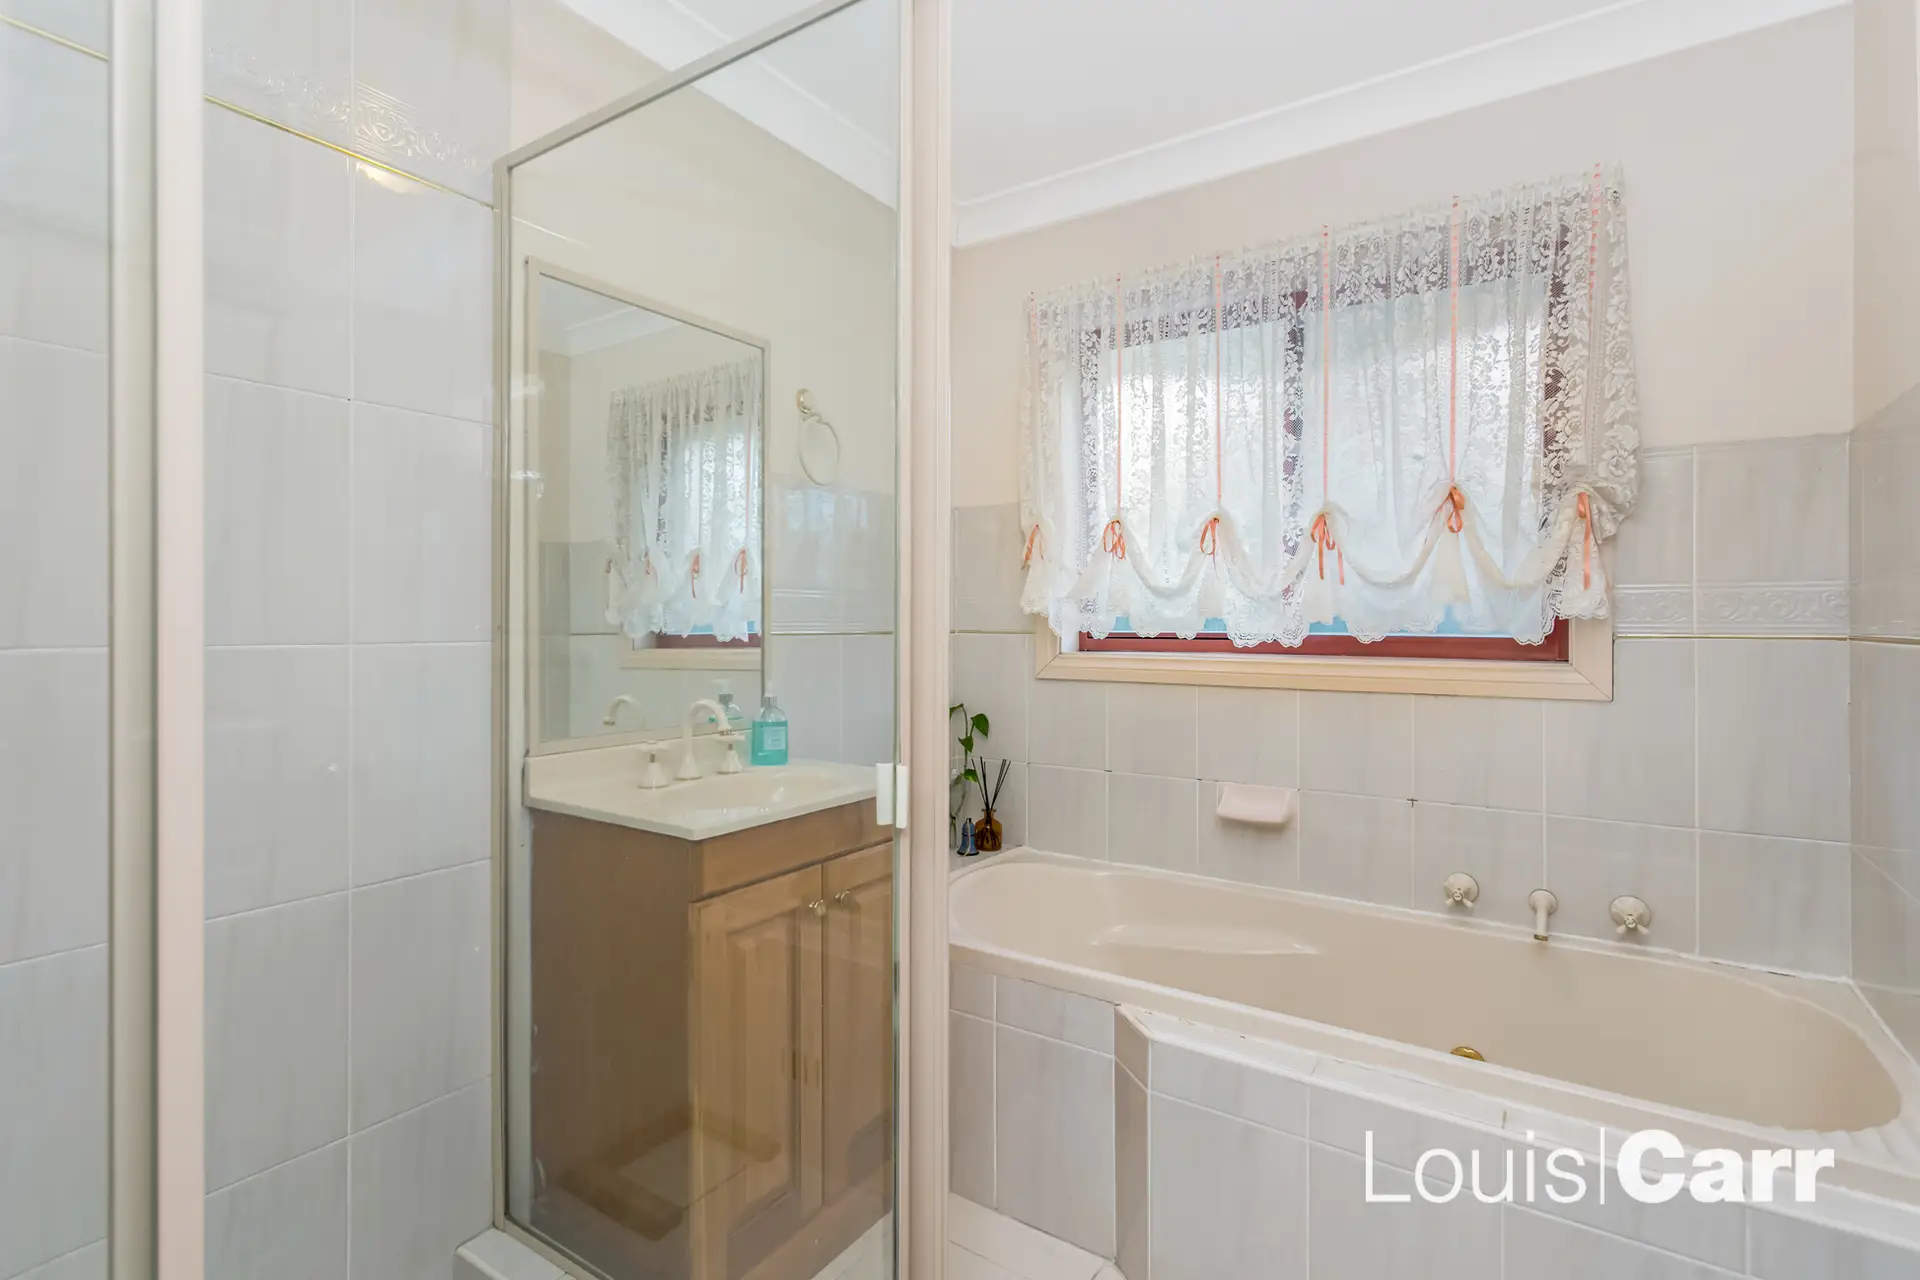 12 John Radley Avenue, Dural Leased by Louis Carr Real Estate - image 12